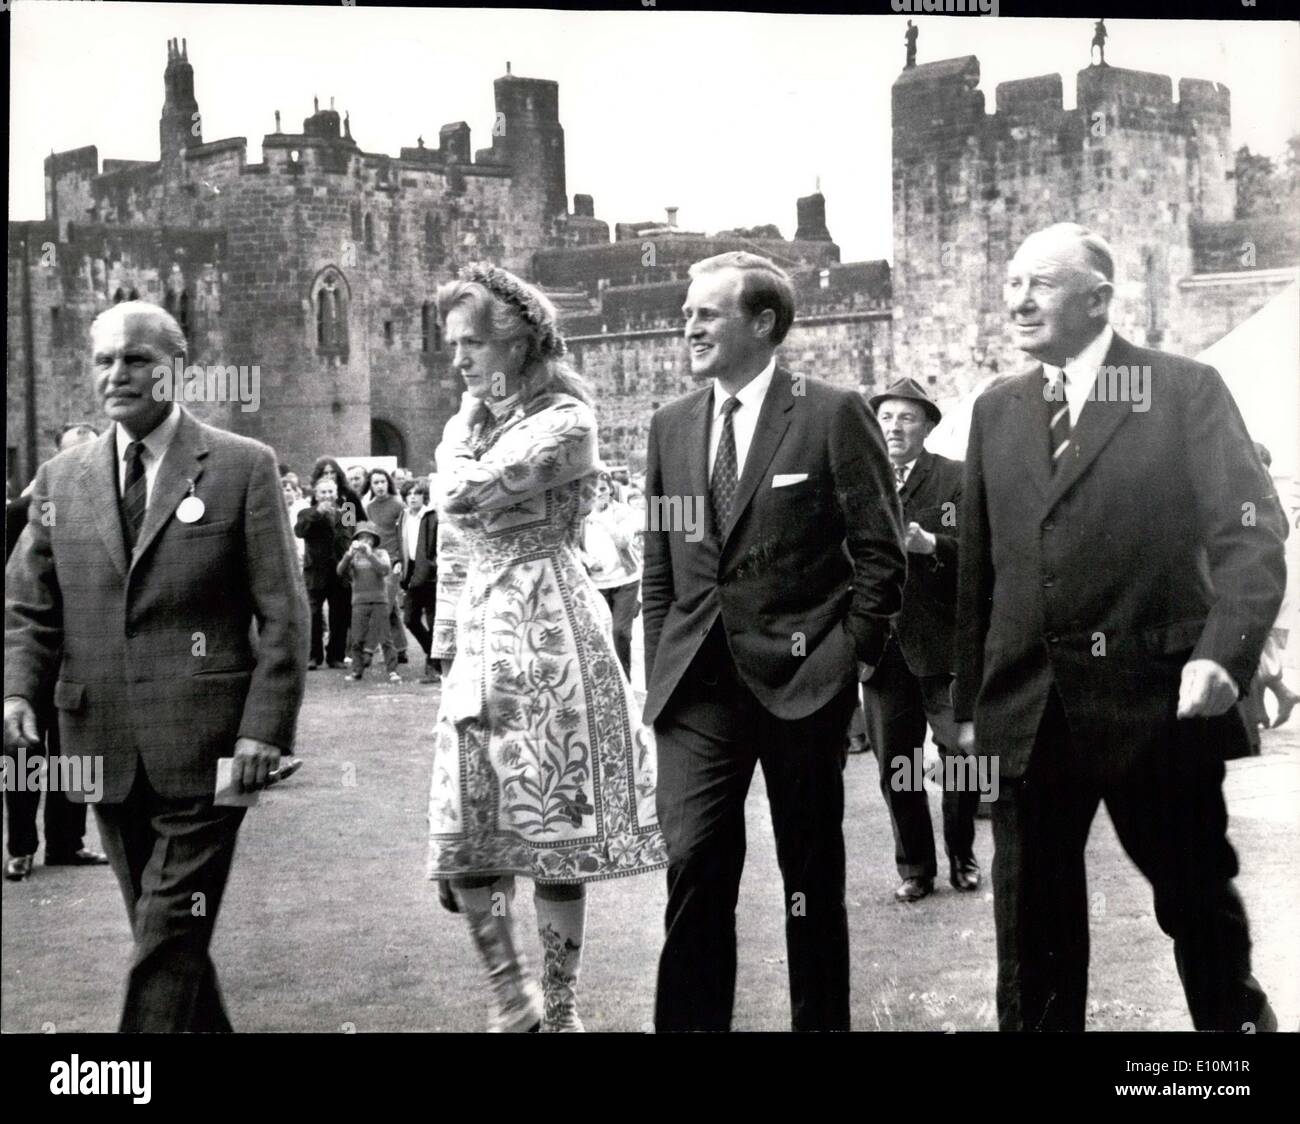 May 25, 1973 - The Lambton Affair: Lord Lambton on Tuesday resigned as Defence Under-Secretary for the R.A.F., because of his involvement with a call girl. Photo Shows This picture, taken in 1971, shows Lady Lambton with Winston S. Churchill, at a Conservative fete held at Alnwick Castle. On left is Maj. O.B. Younger; and on right is Major. A.S.C. Browne. Stock Photo